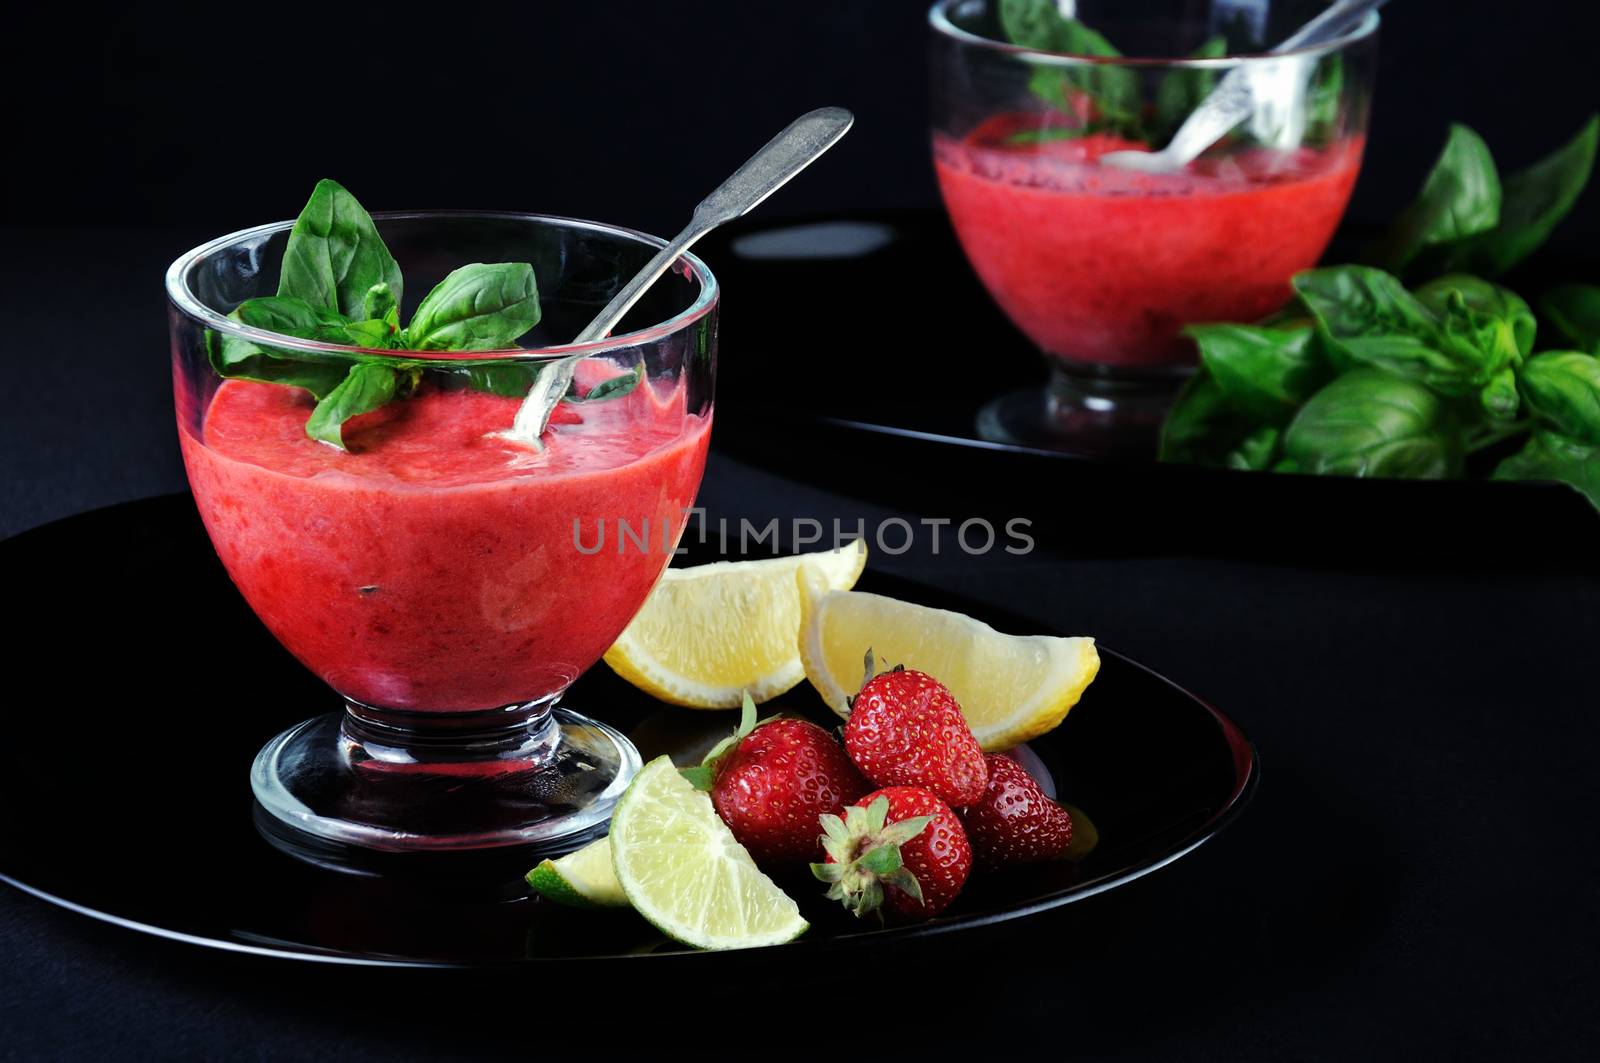 Summer strawberry smoothies with basil, Lime and honey, Healthy and refreshing recipe. A delicious alternative to dessert